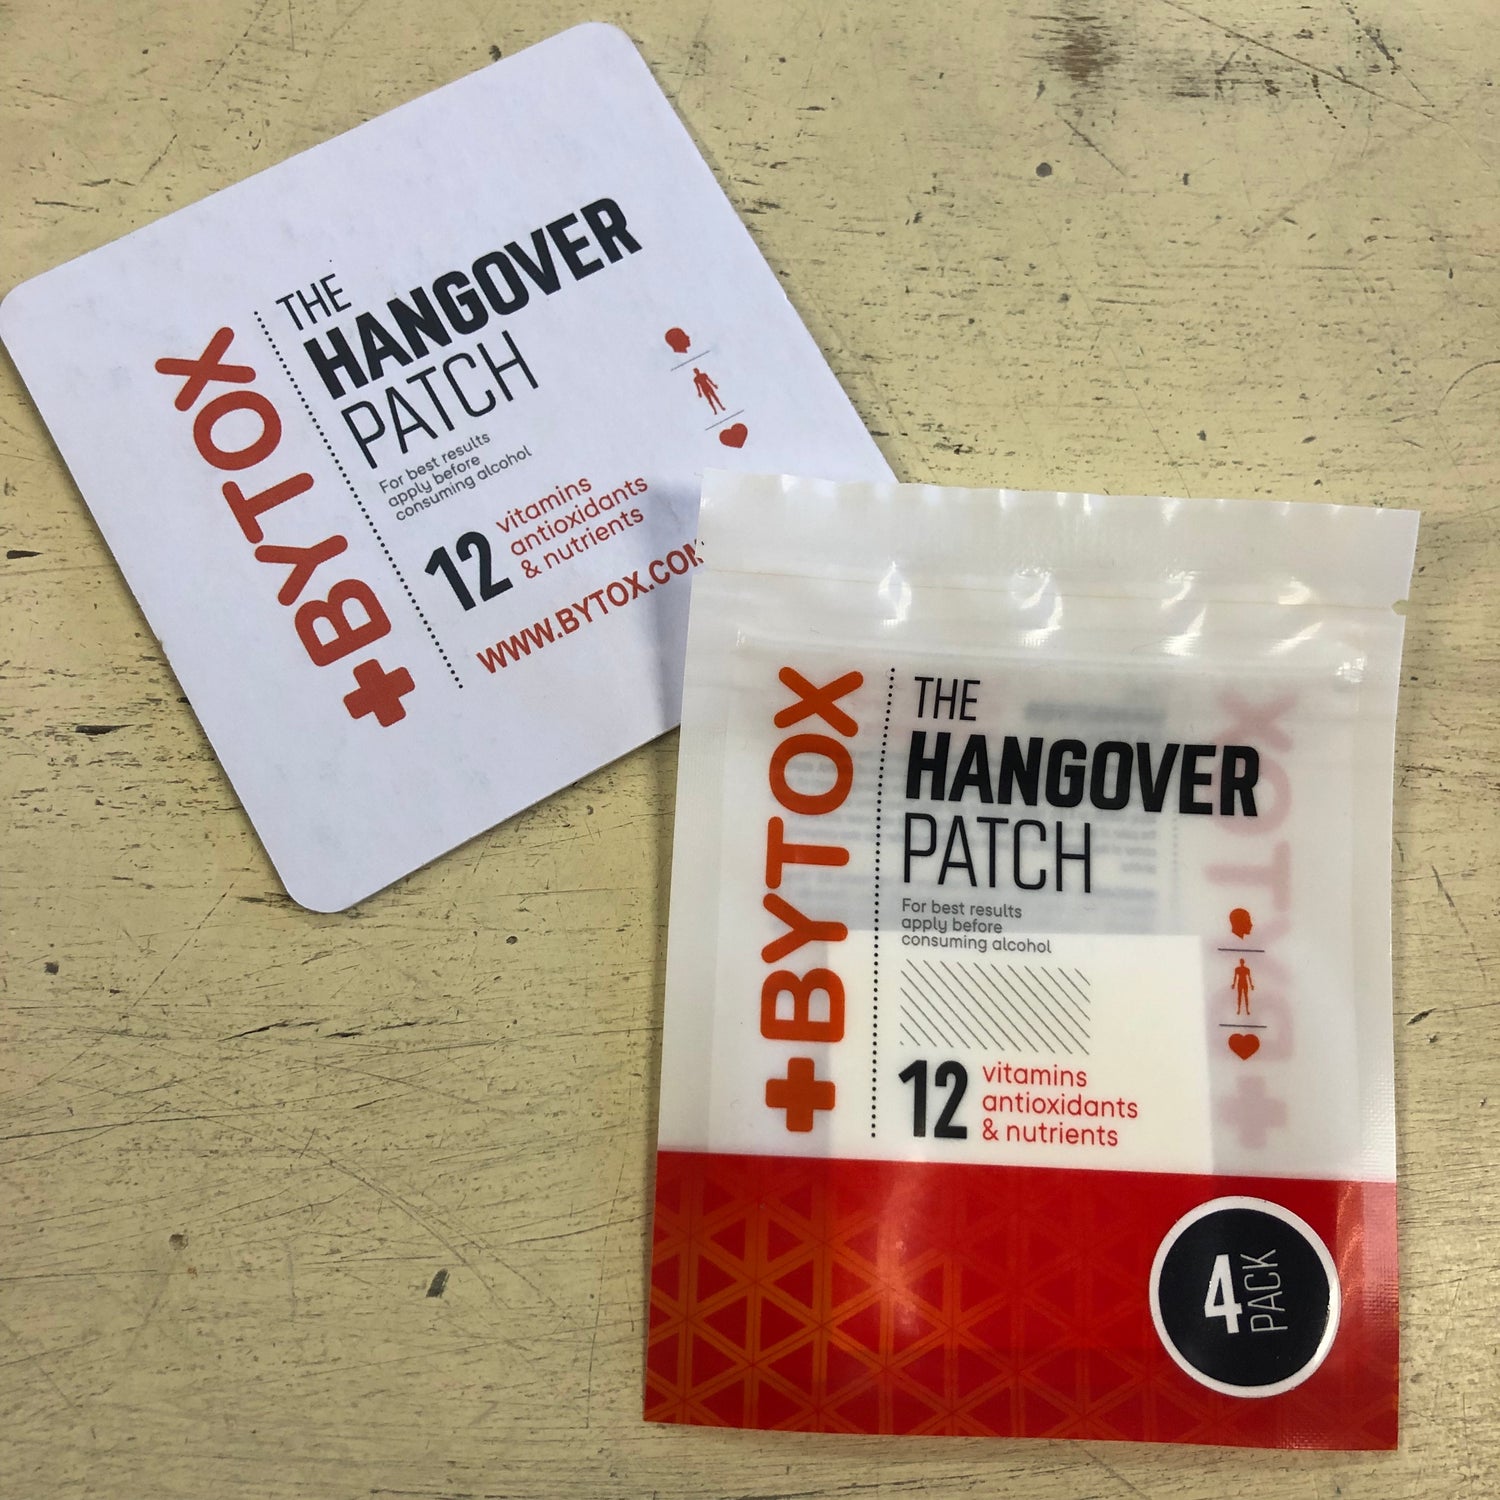 Does the Bytox Hangover Patch Work?